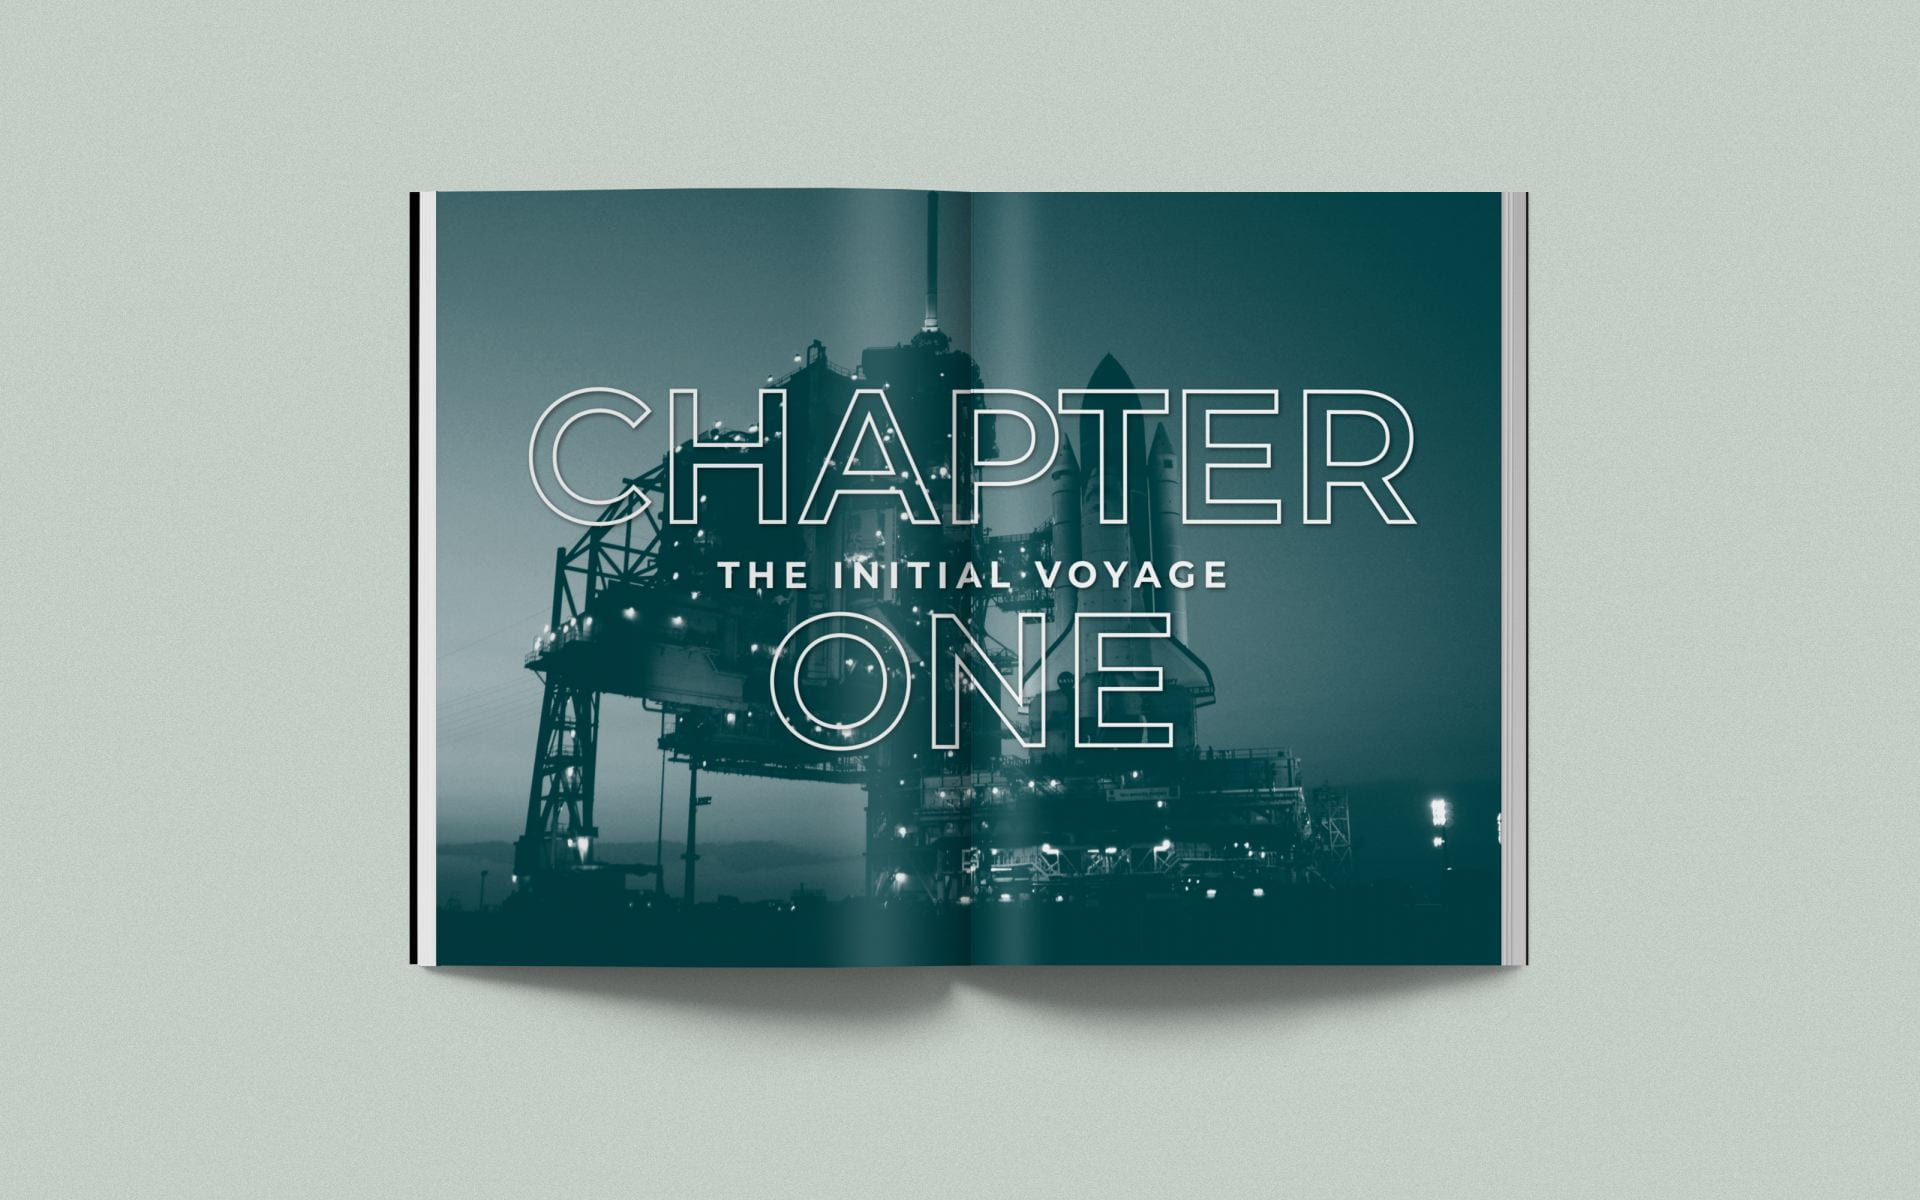 Chapter one 'The Initial Voyage' with background image of space launch.